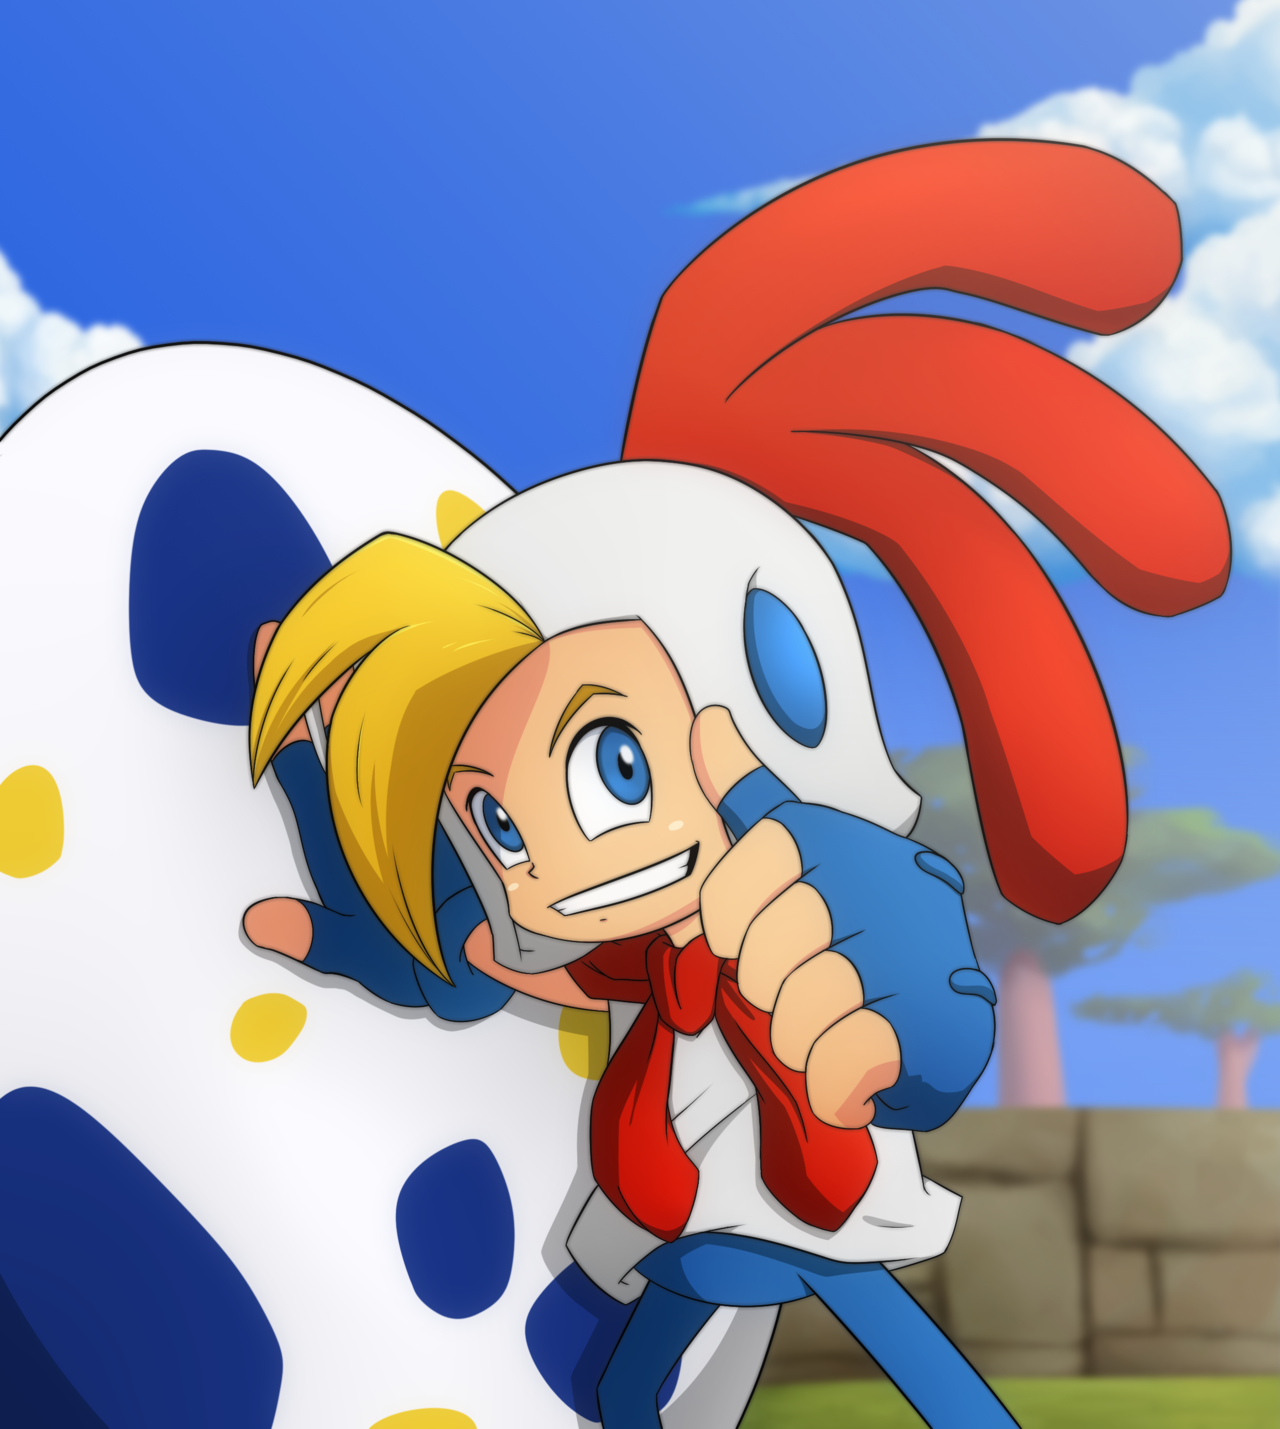 In an era where we’re getting remakes and HD re-releases, would REALLY love to see Billy Hatcher and the Giant Egg on Nintendo Switch! Loved that game so much growing up! I realize it would probably never happen in a million years, but feel like...